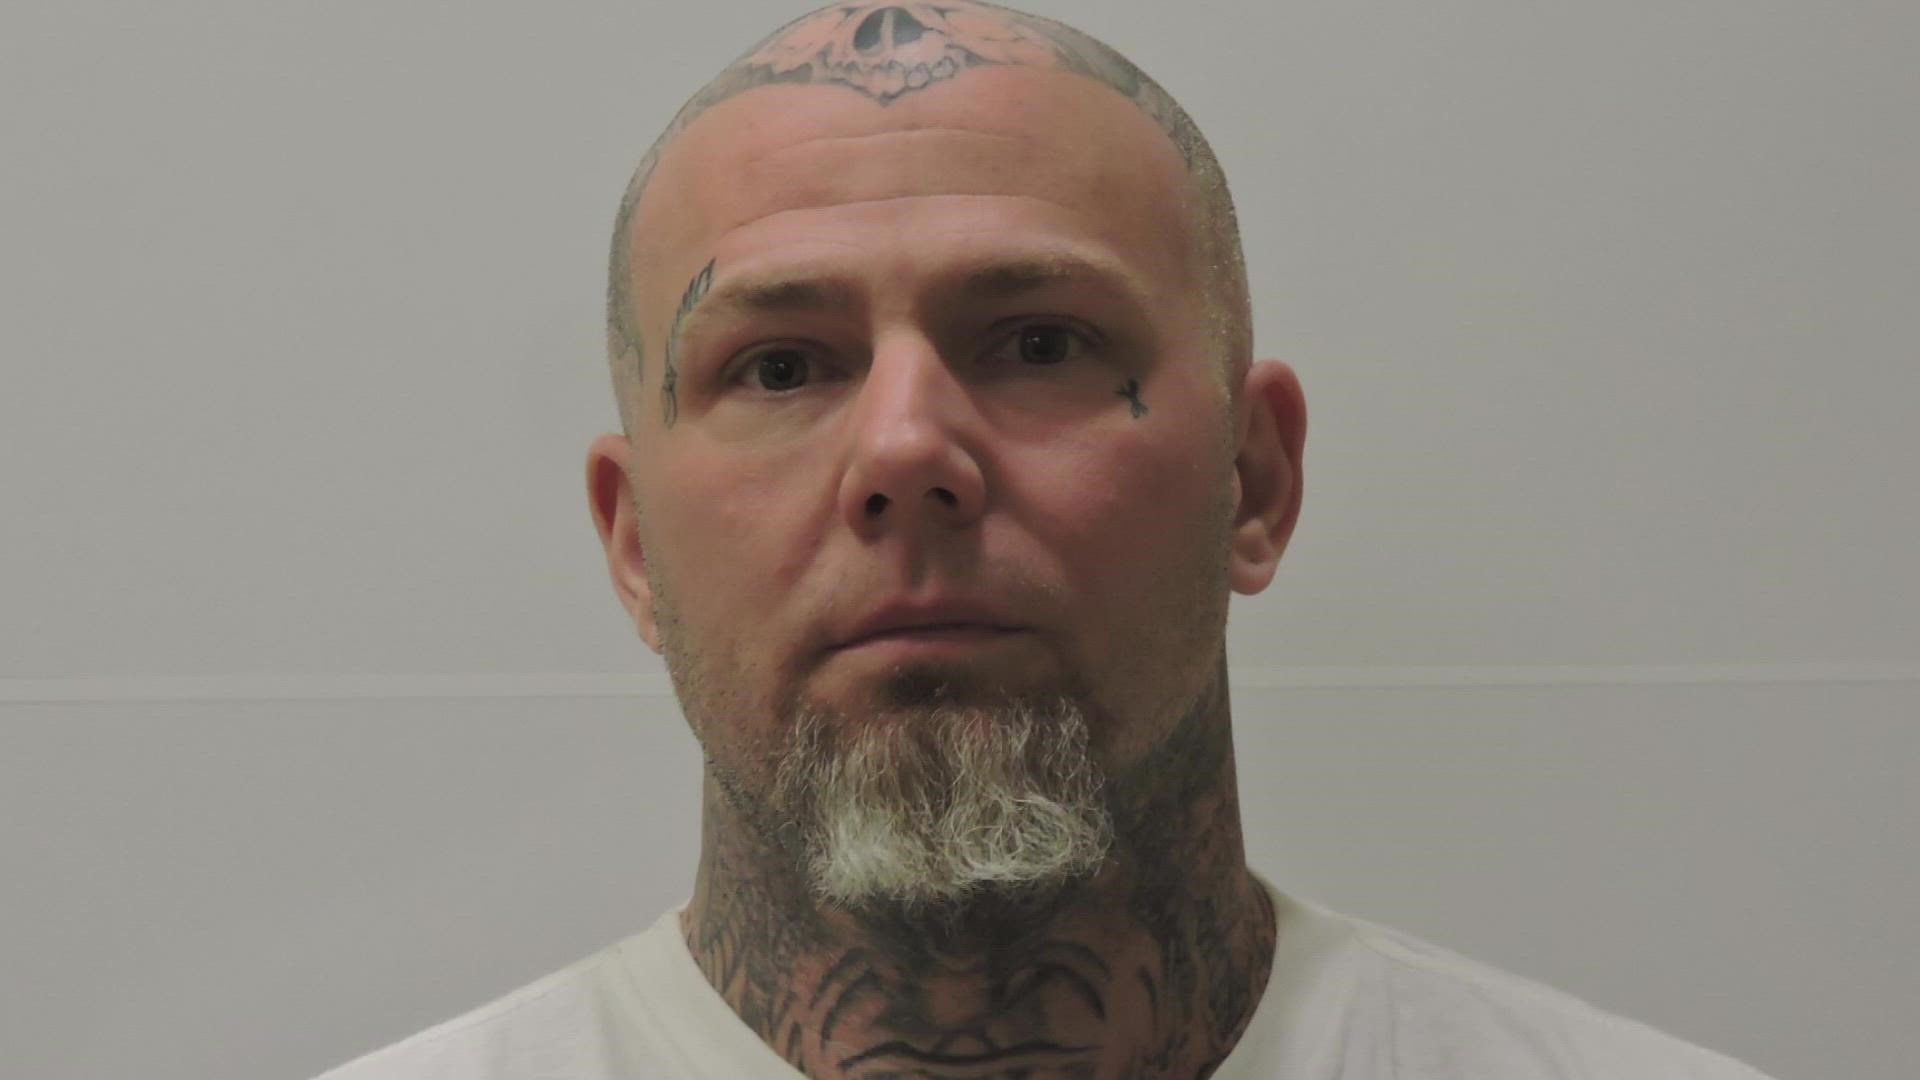 A manhunt is underway today for an accused killer Daniel Egan who failed to appear in court in Chaffee County.